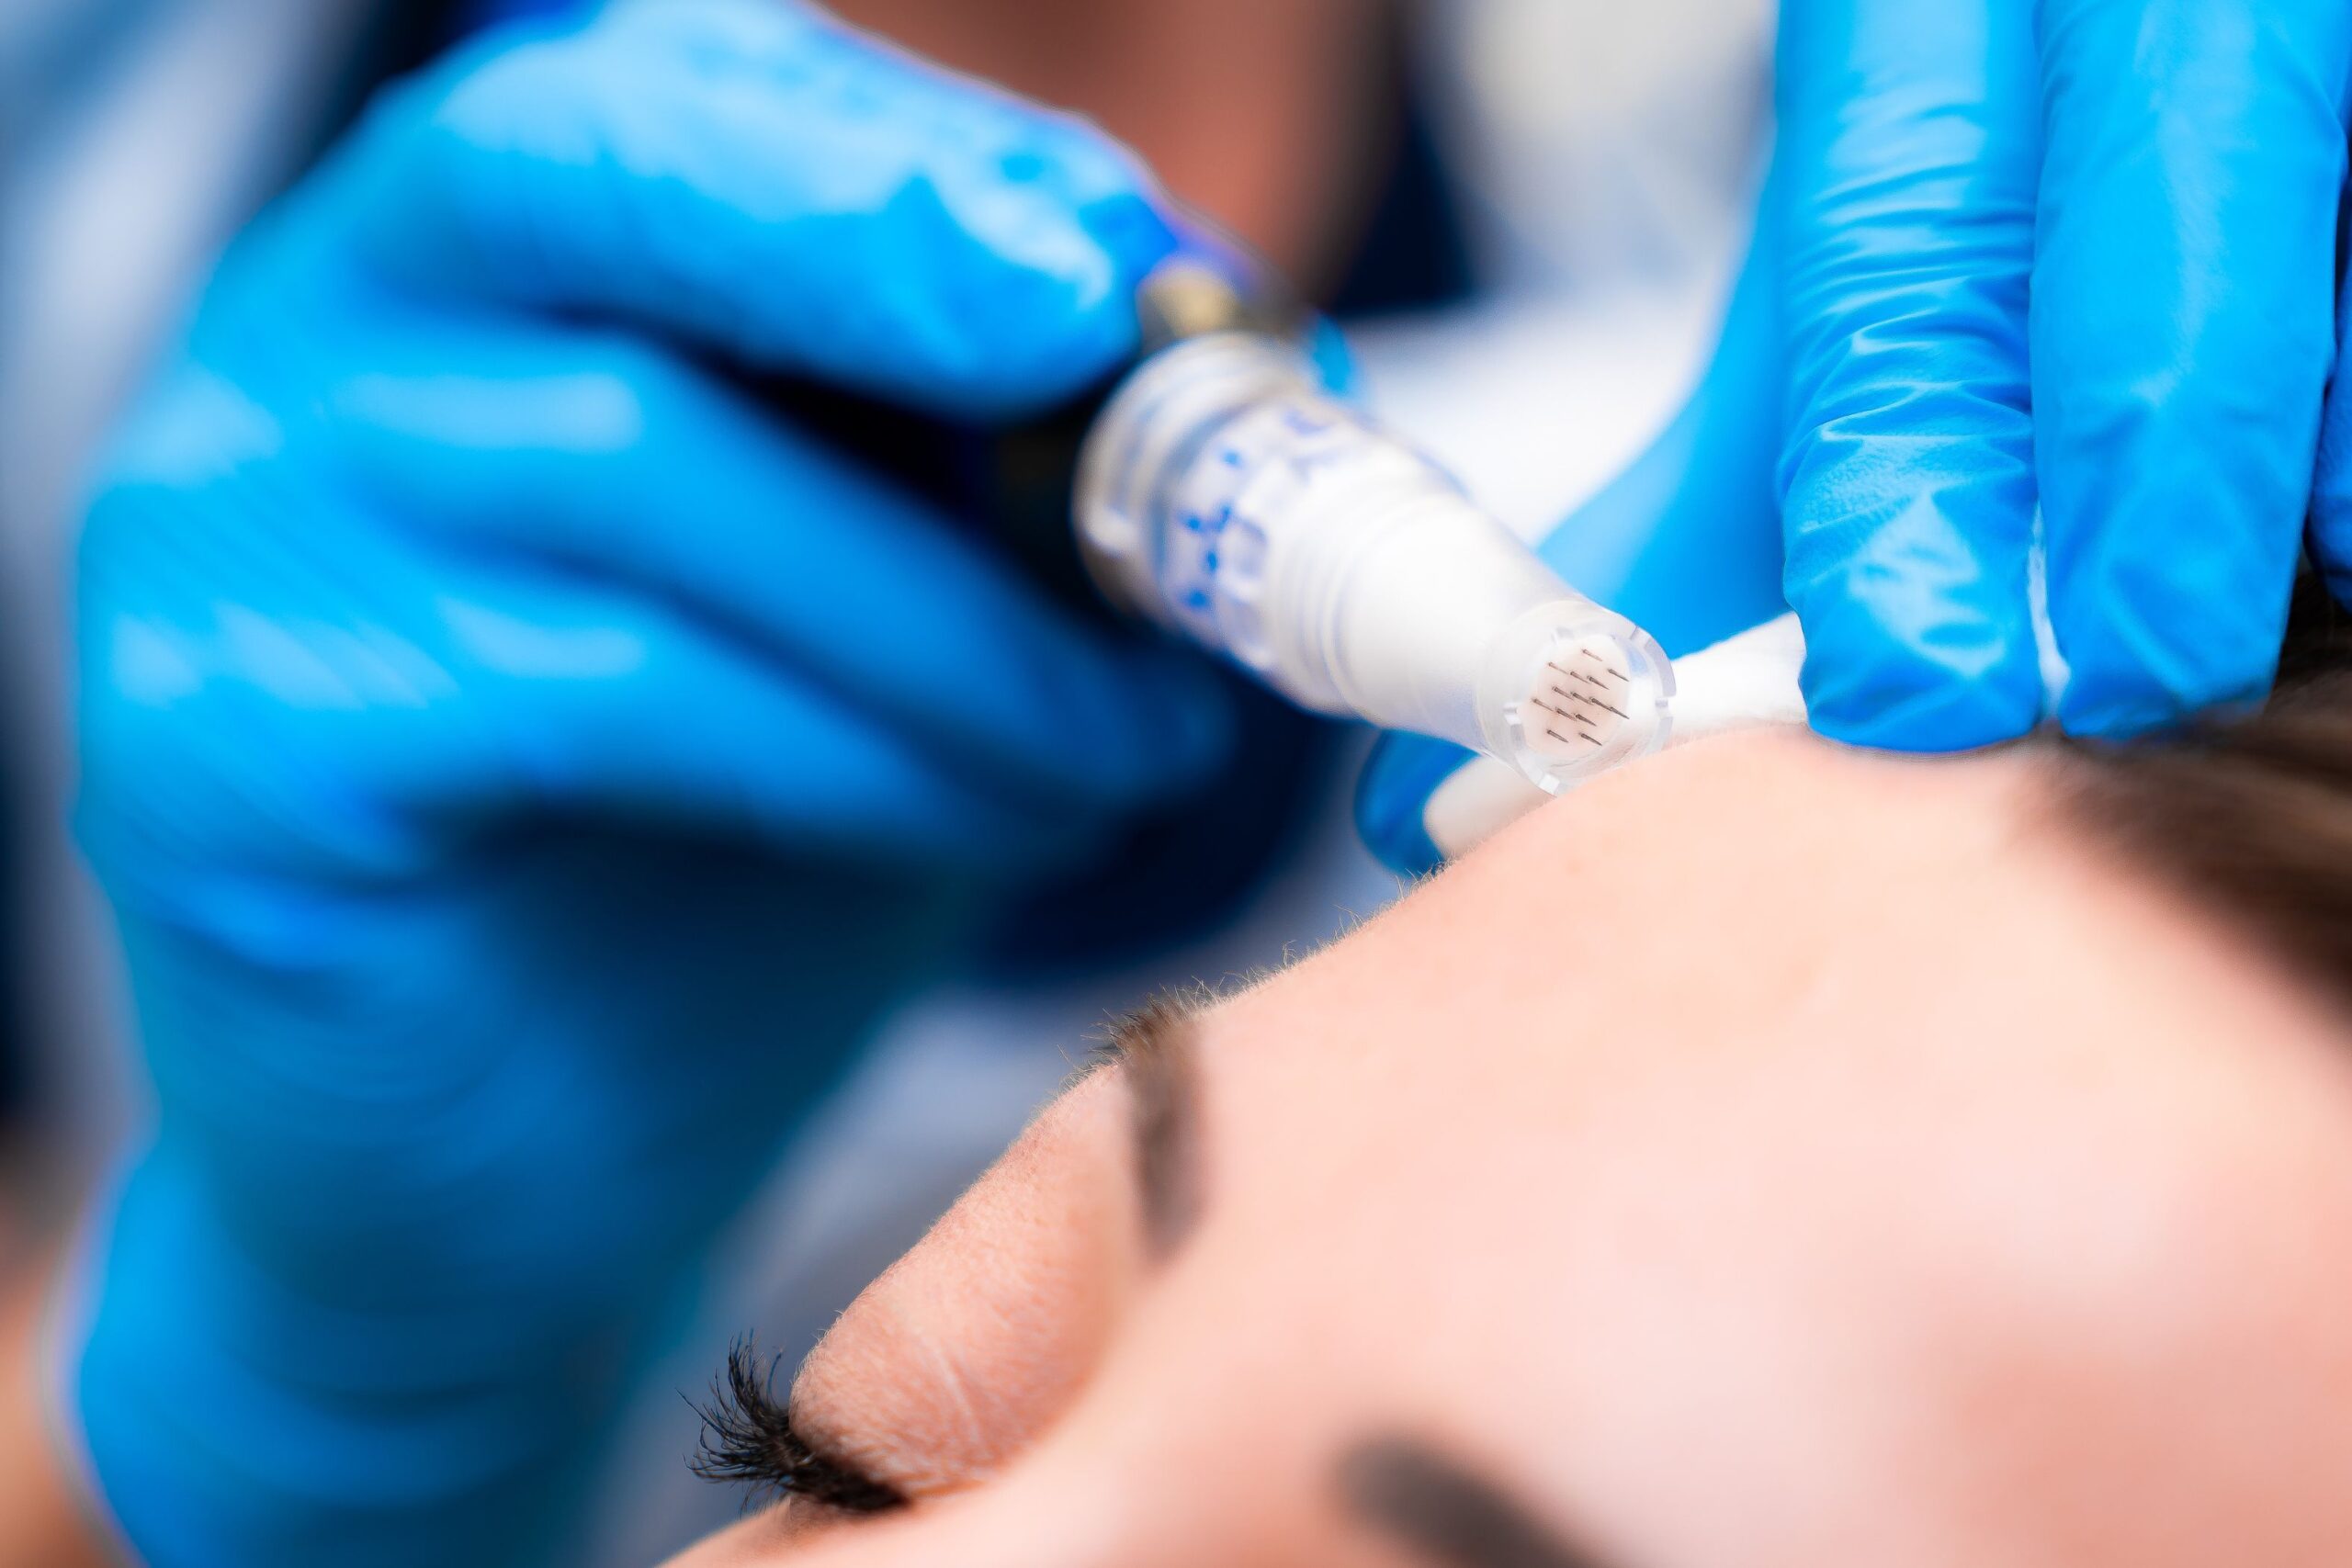 Microneedling for acne scars at Freyja Medical in Wrexham, Nantwich and Cheshire